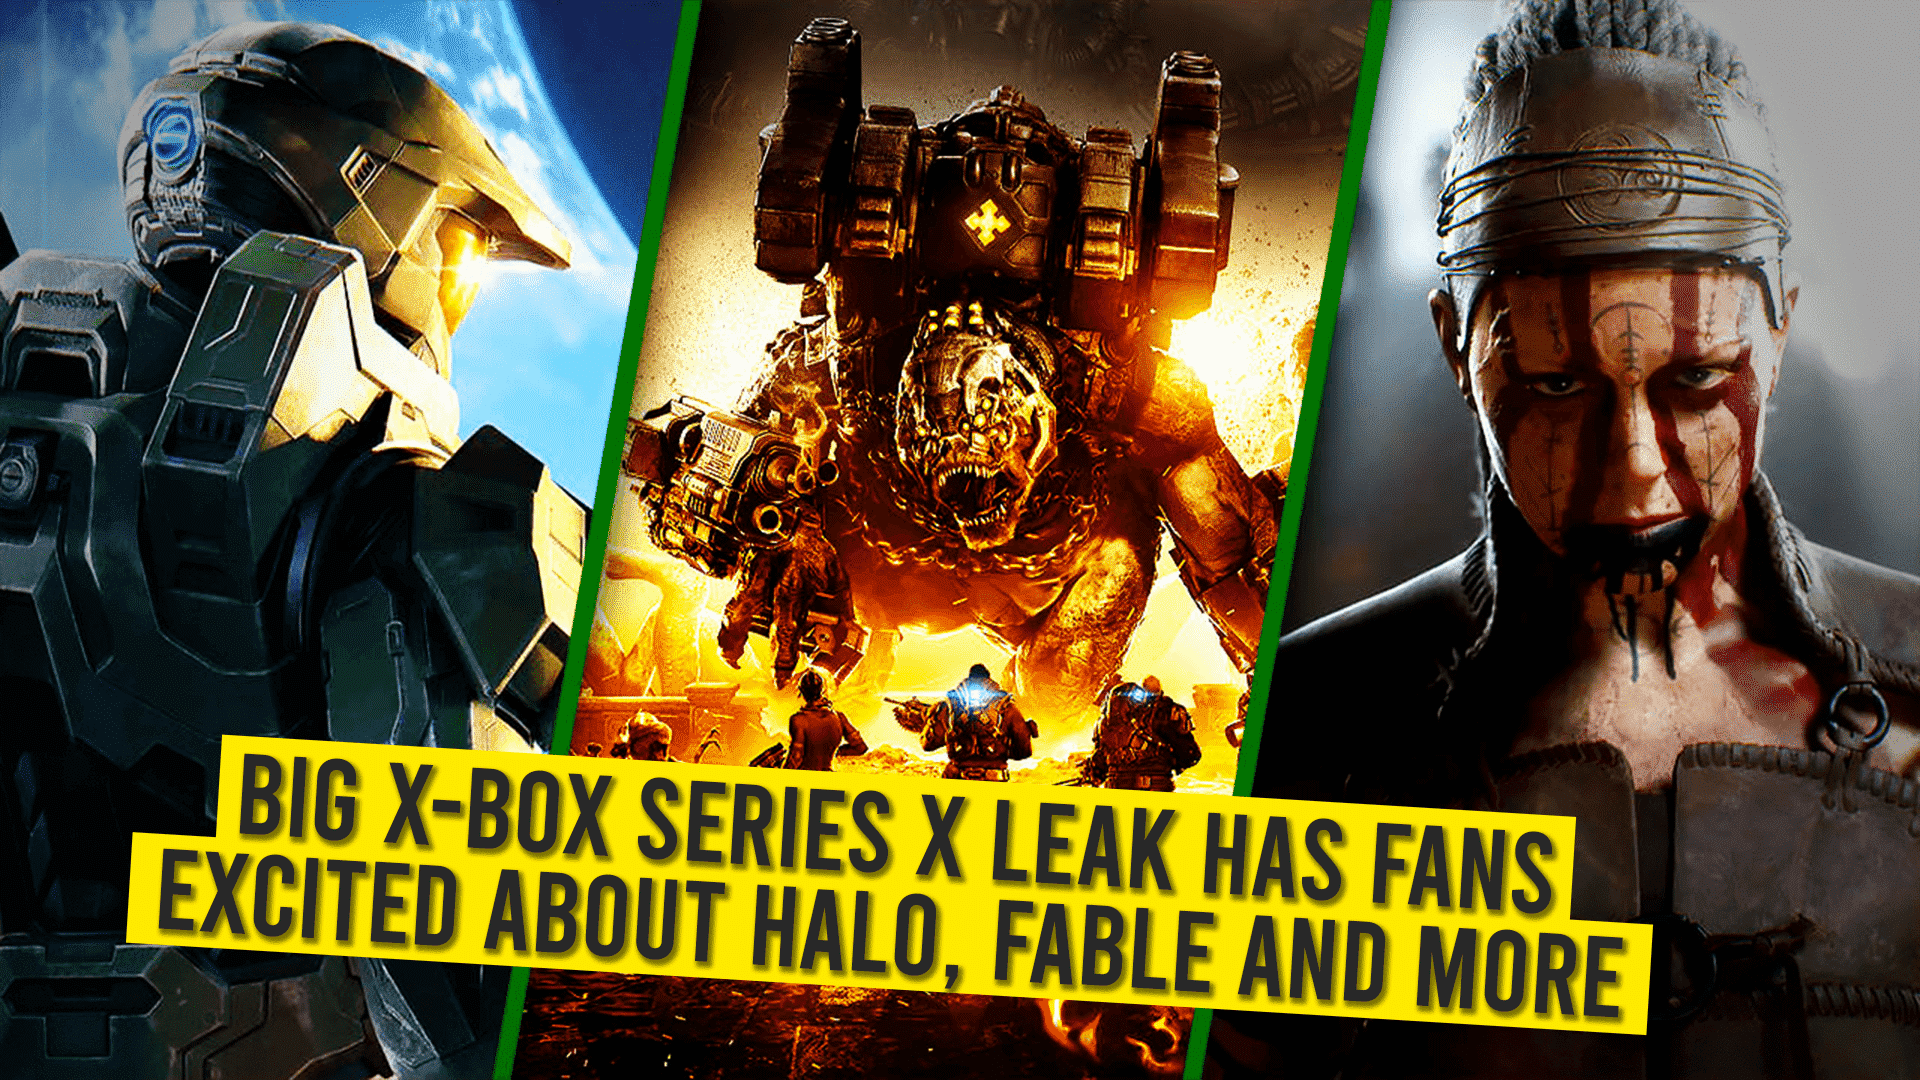 Big X-Box Series X Leak Has Fans Excited About Halo, Fable And More.